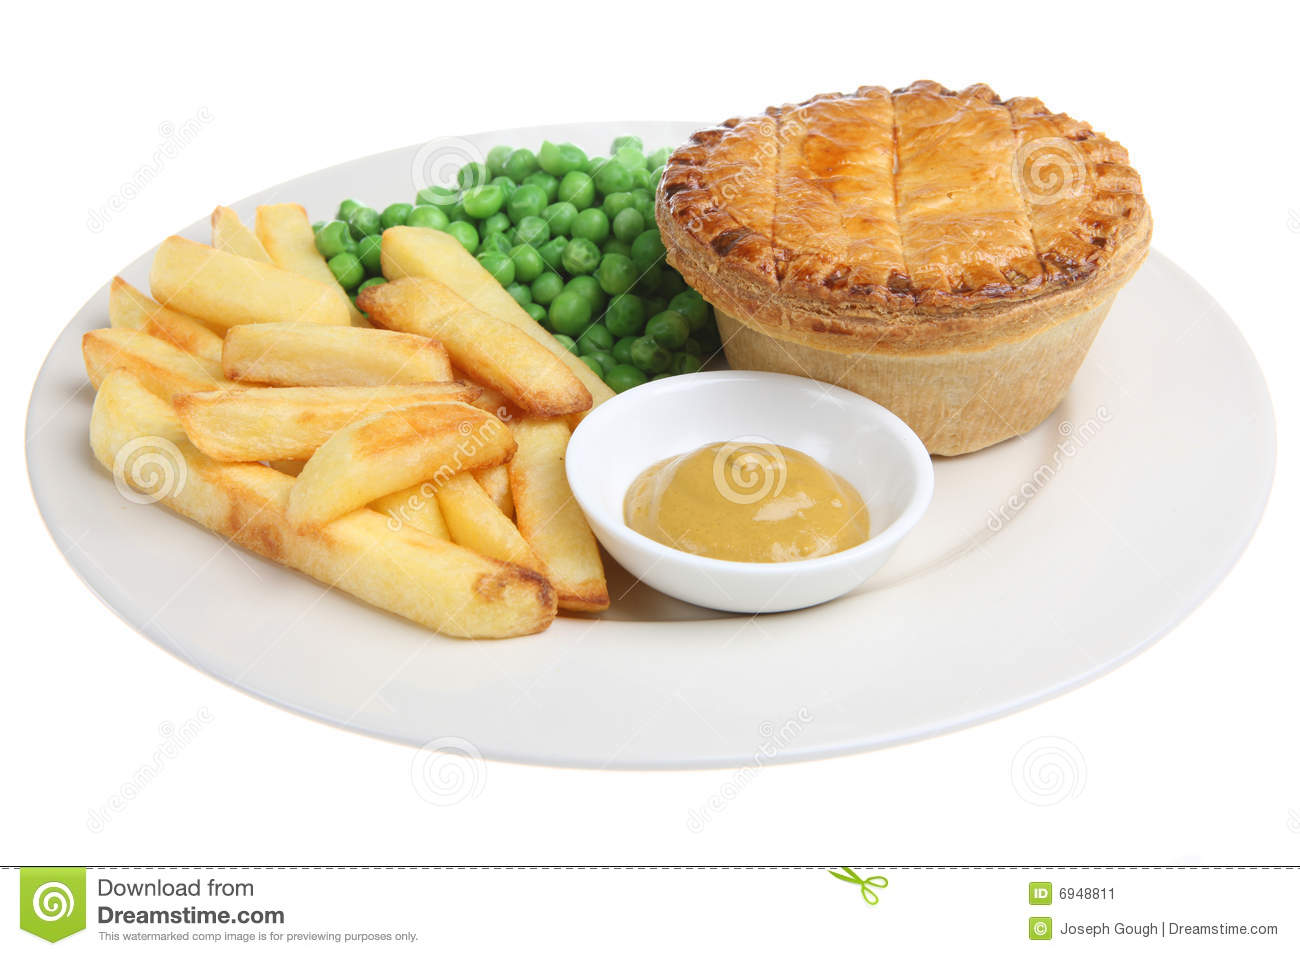 Steak Pie And Chips Stock Image   Image  6948811